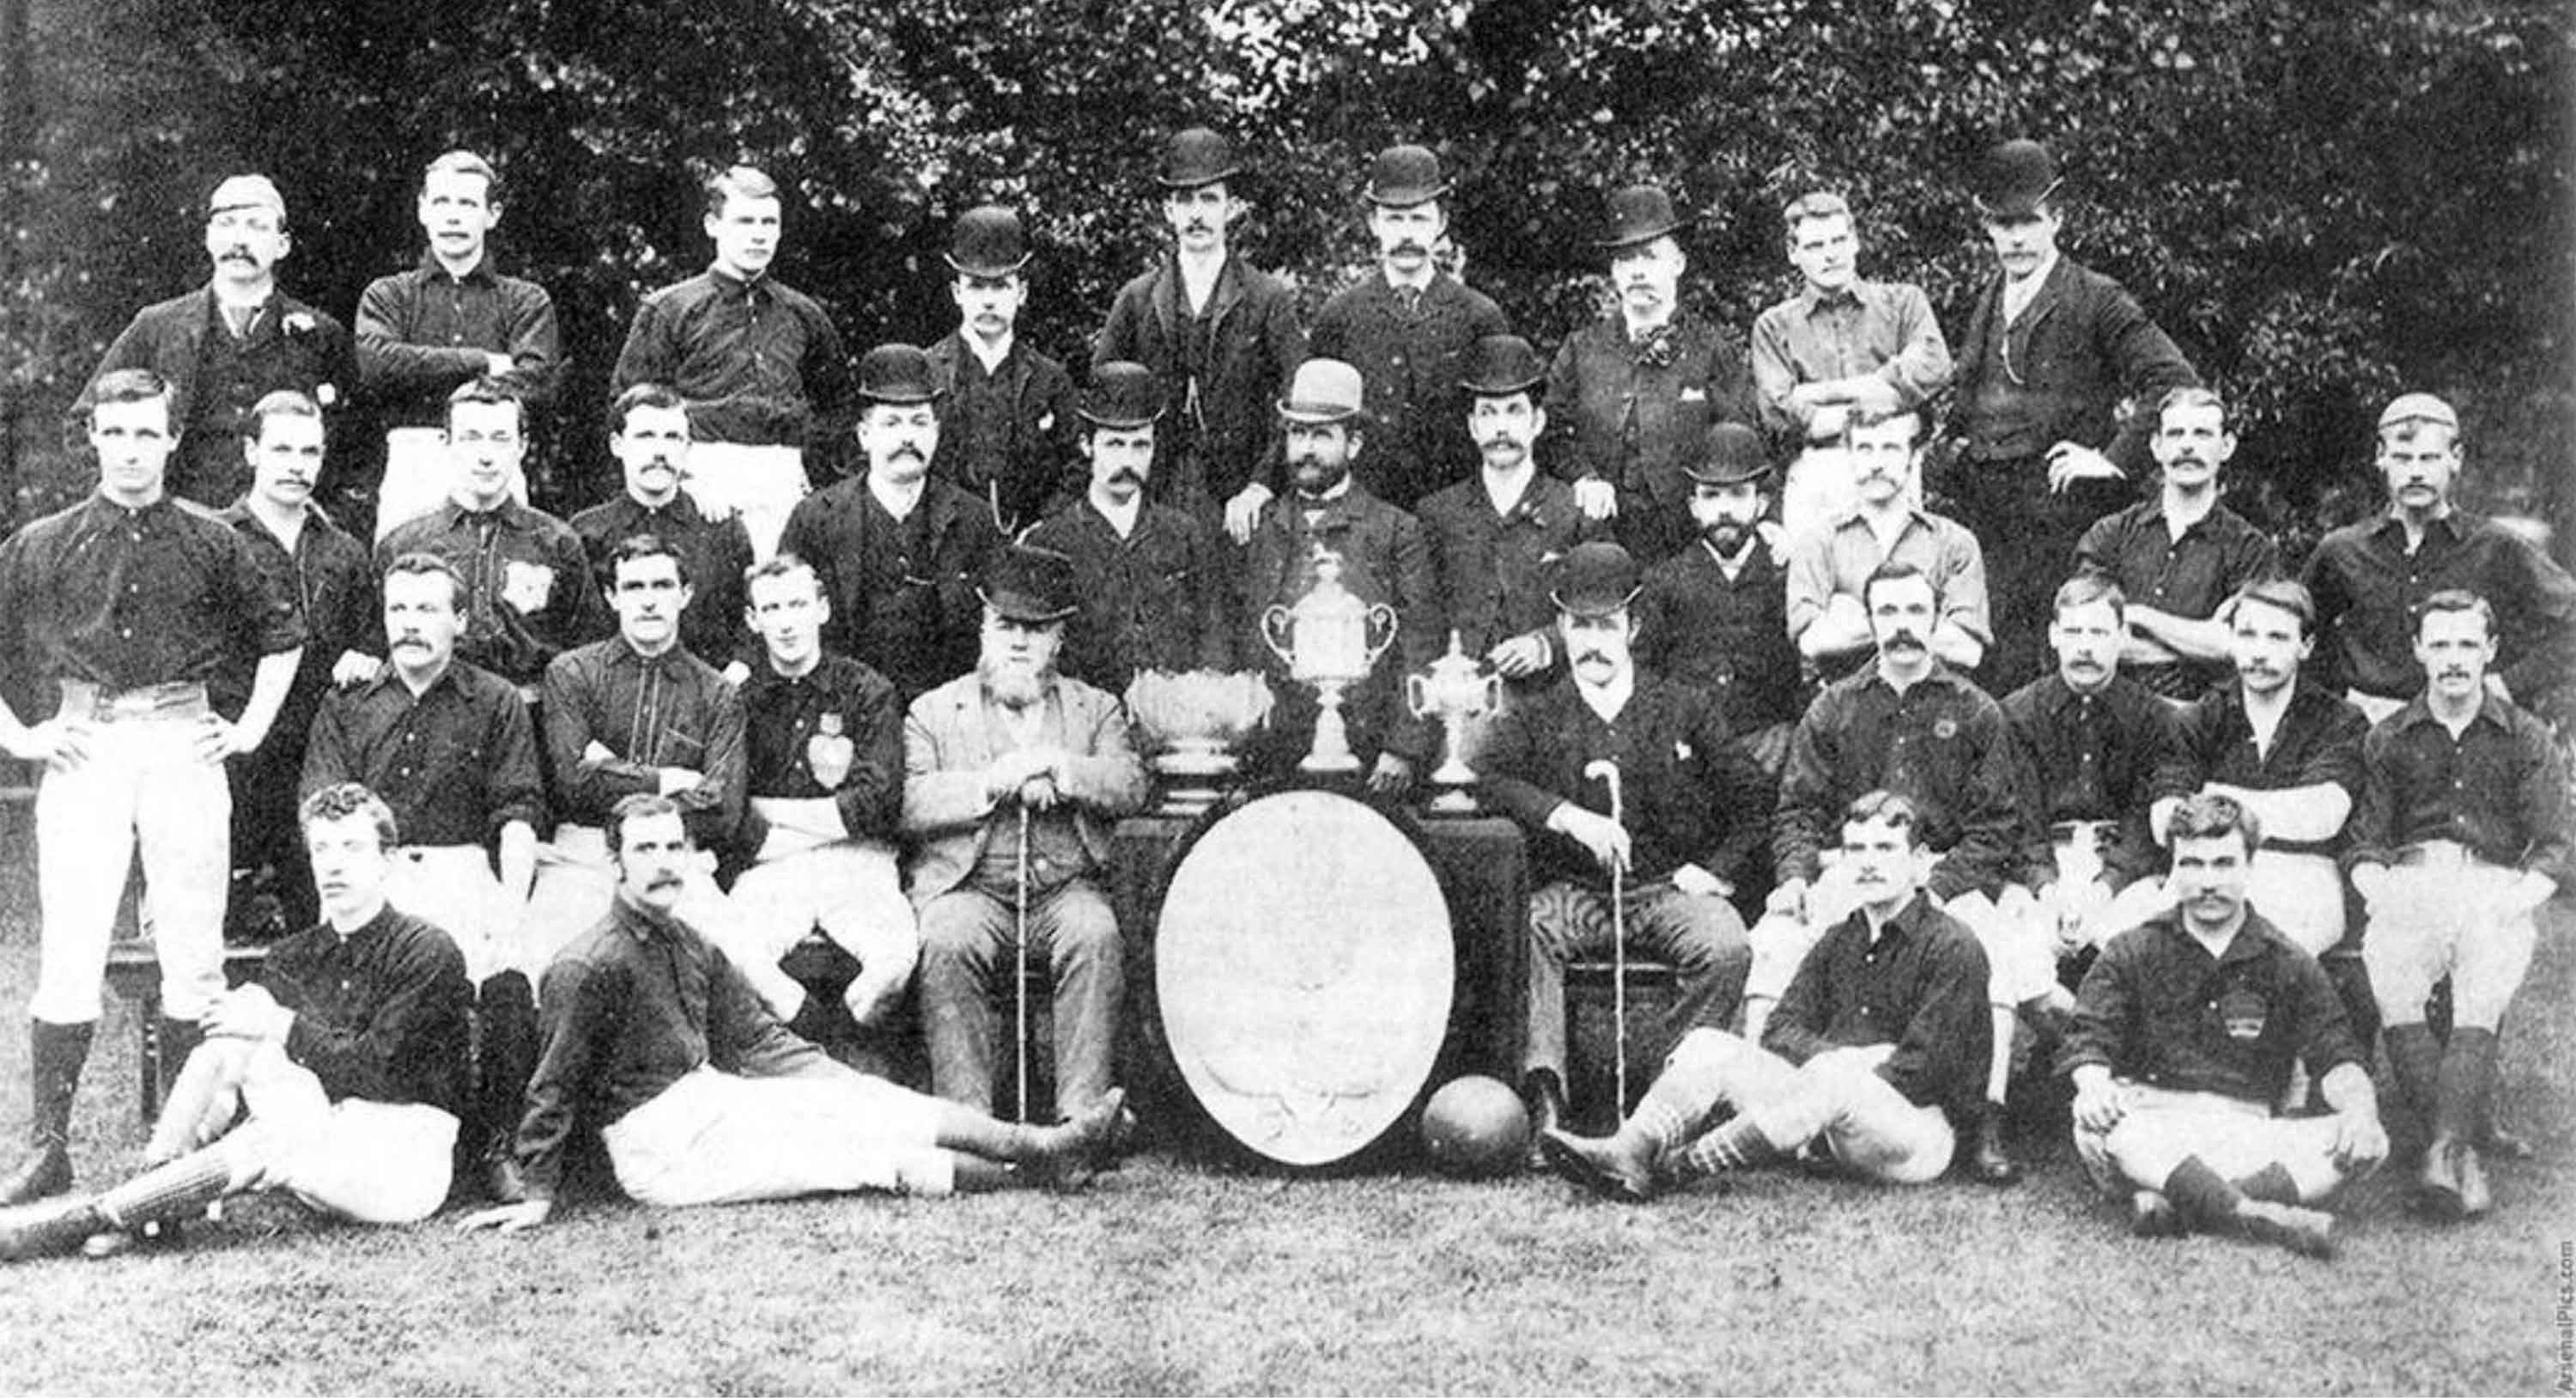 Black and White image of the late 19th Century Arsenal Football Club squad posing with trophies